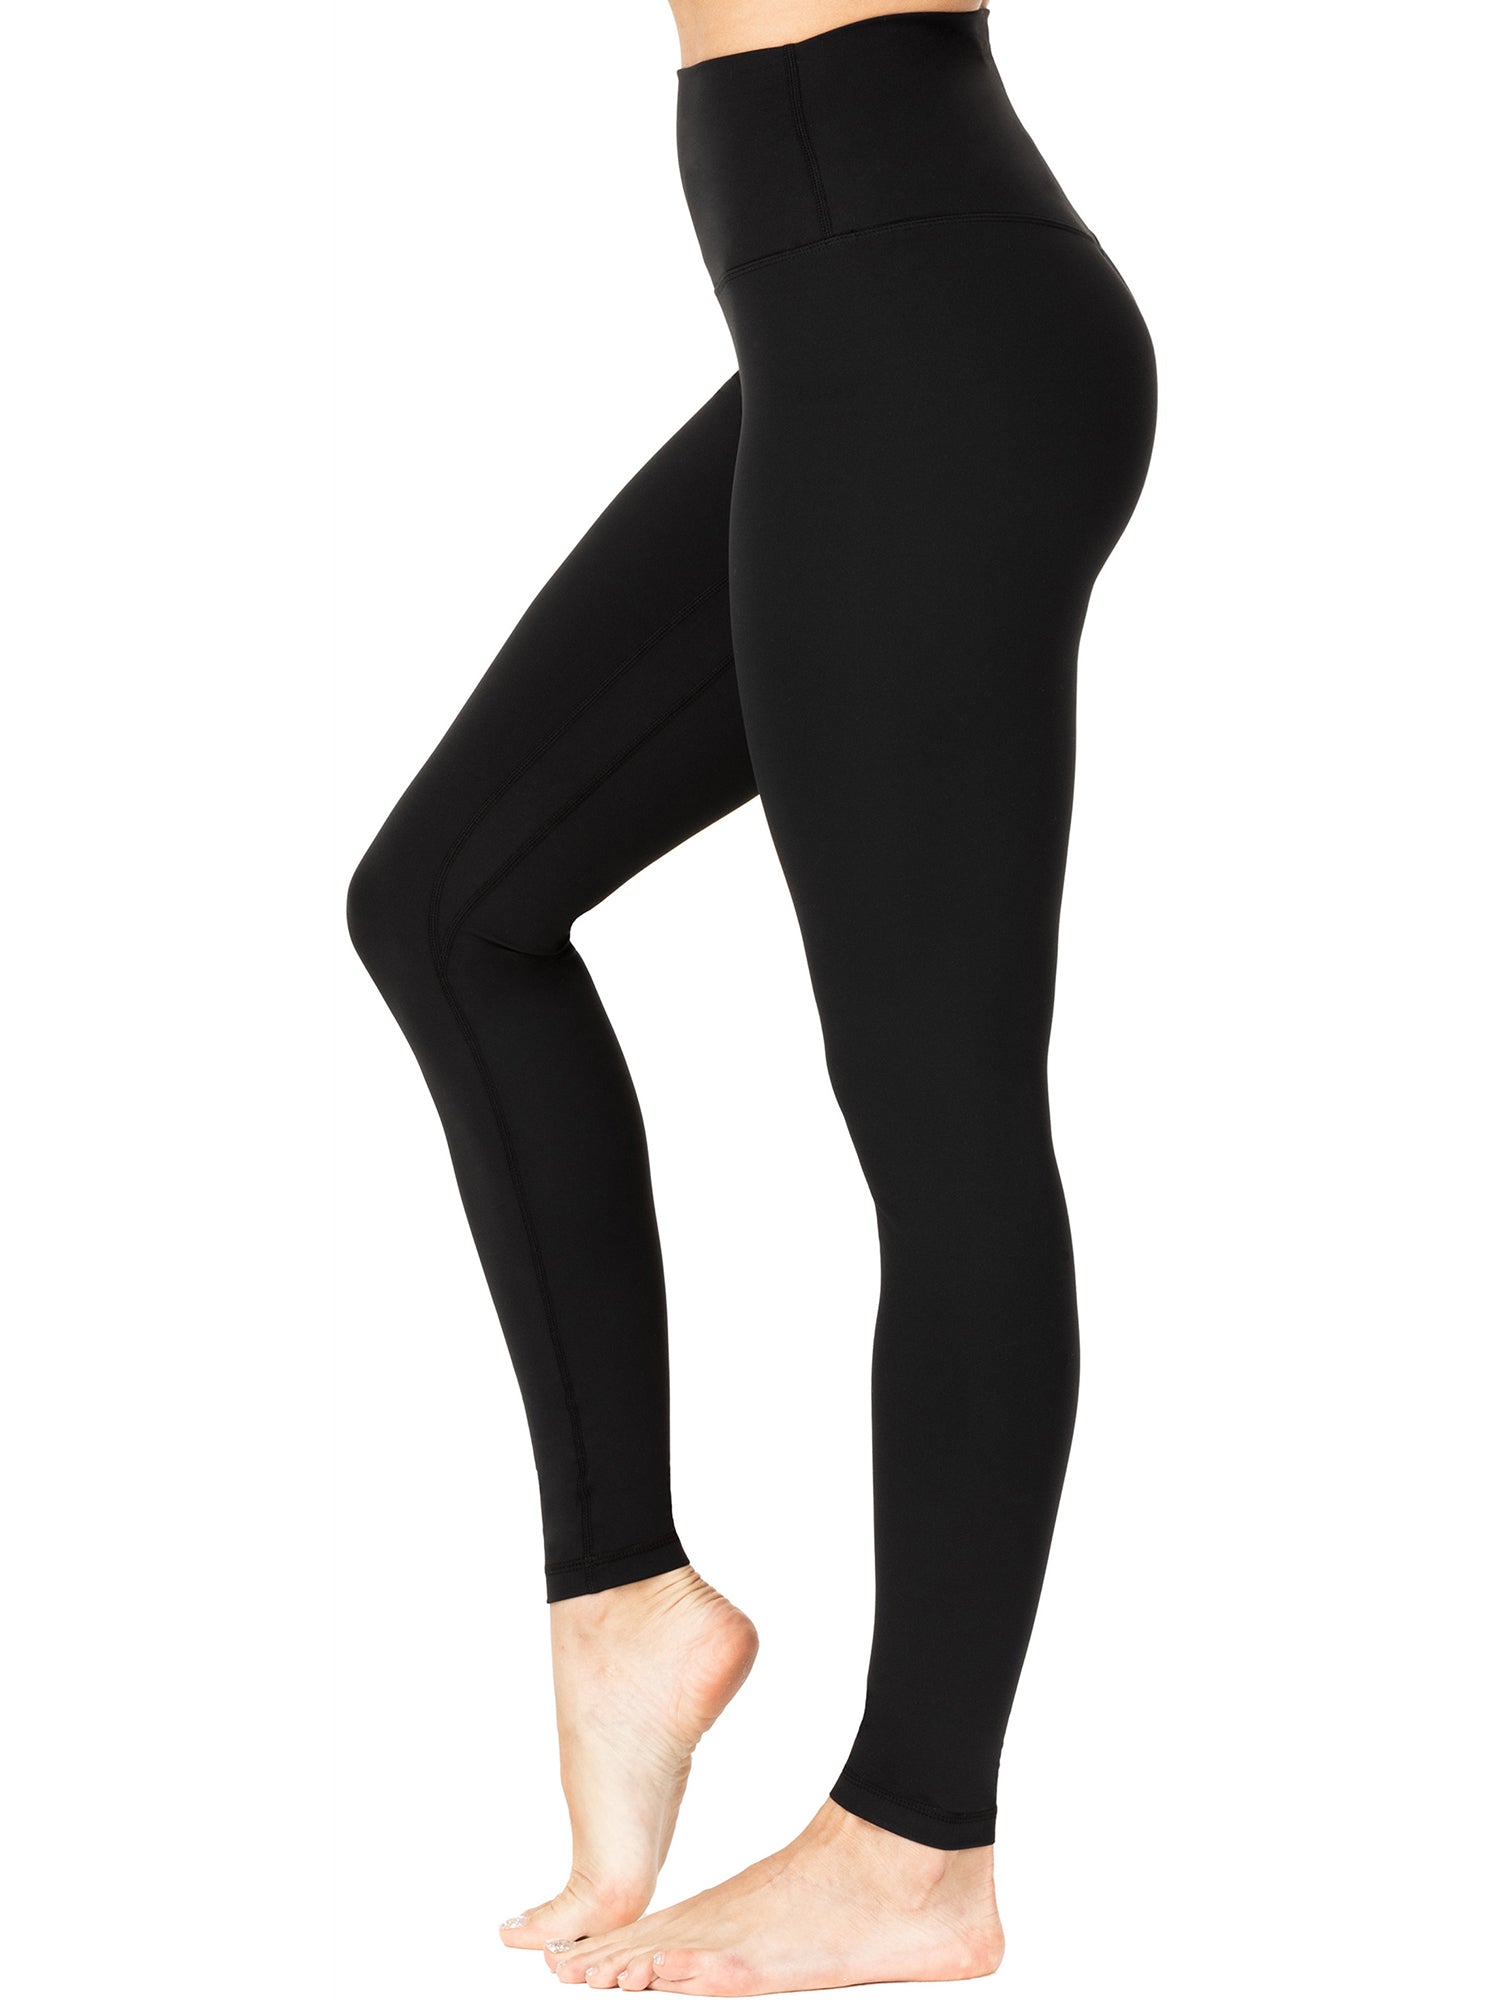 Jyeity Fall Styles Without The Big Bucks, High Waist High Elasticity Yoga  Pants With Pockets, Workout Running Yoga Leggings For Women Sunzel Leggings